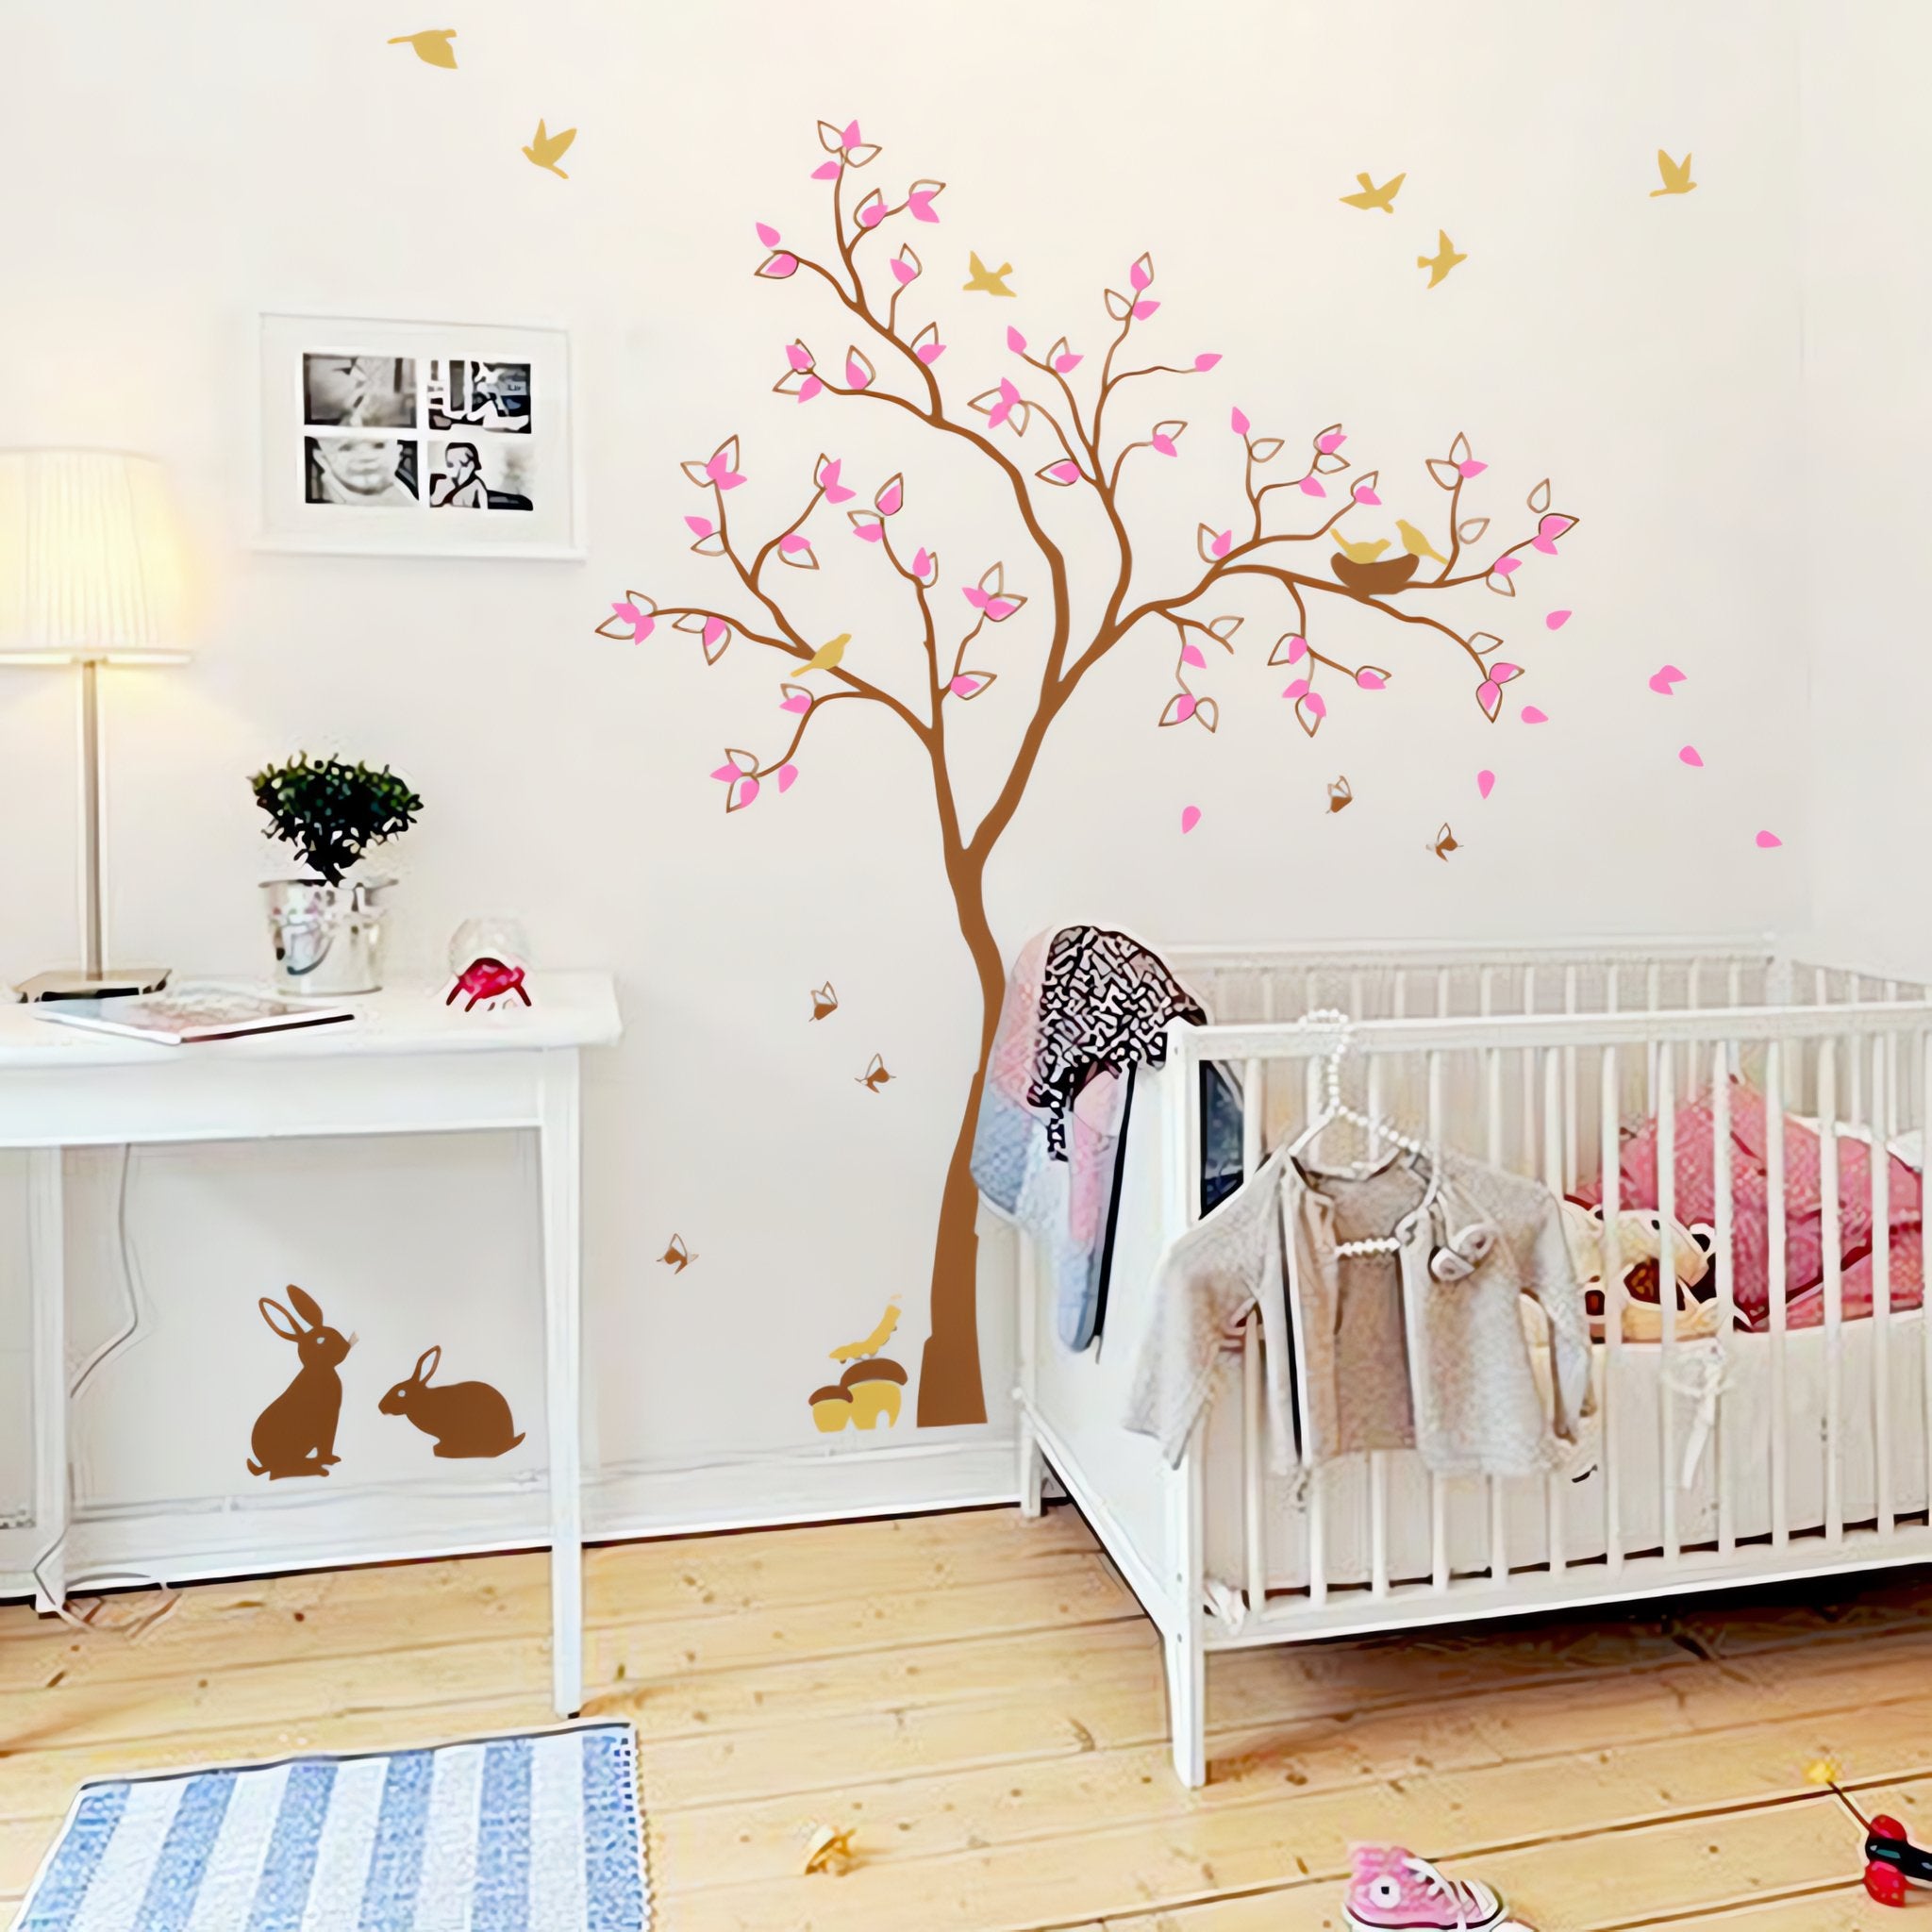 Tree wall sticker with birds, rabbits and a catterpillar in nursery with a crib and table.